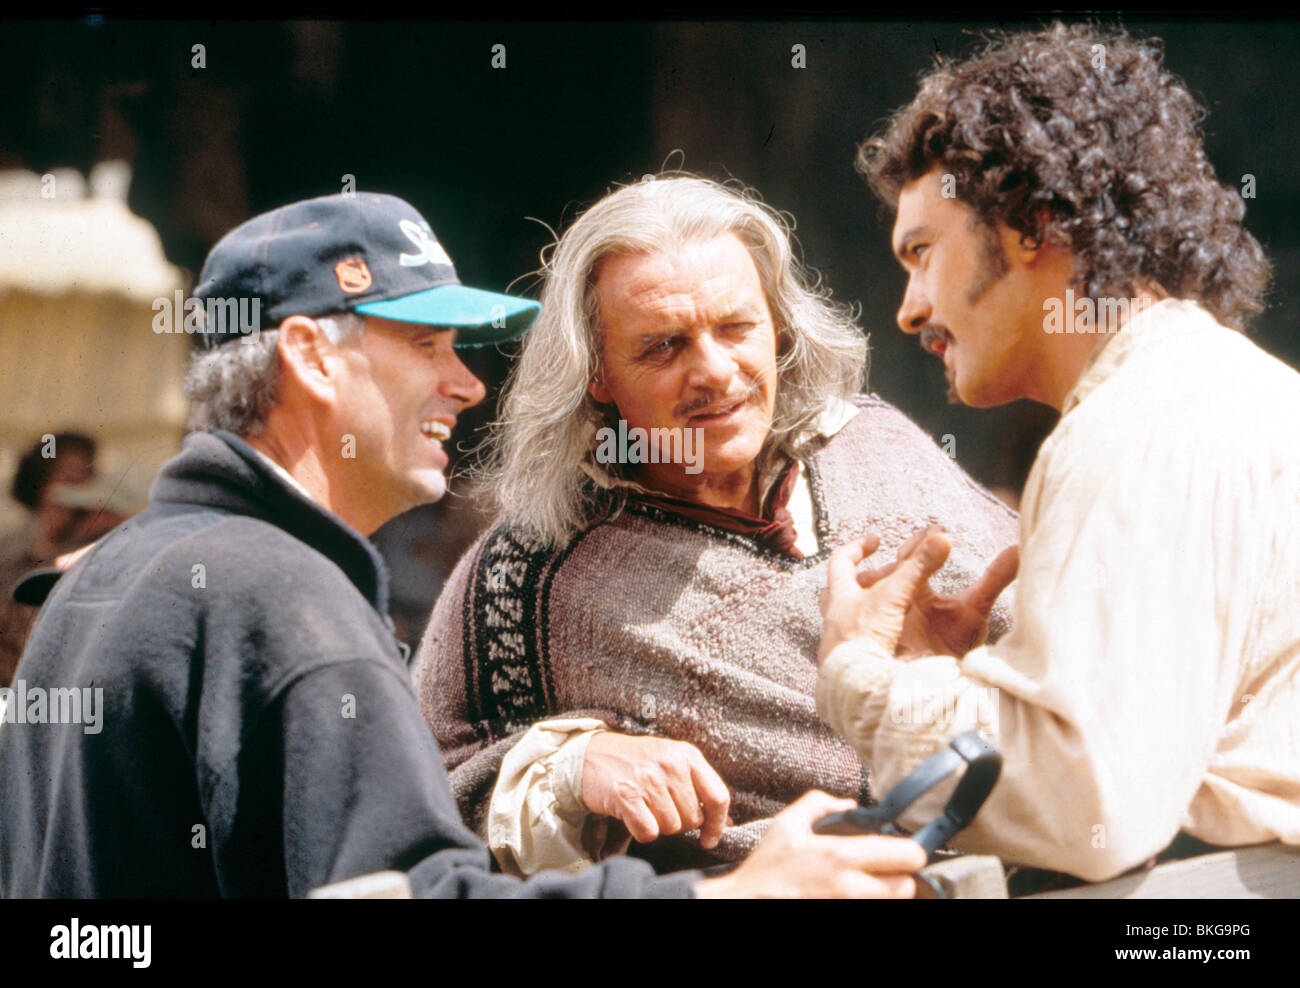 FILMING PRODUCTION (ALT) LOCATION (ALT) BEHIND THE SCENES (ALT) ON SET  (ALT) O/S 'THE MASK OF ZORRO' (1998) WITH MARTIN Stock Photo - Alamy